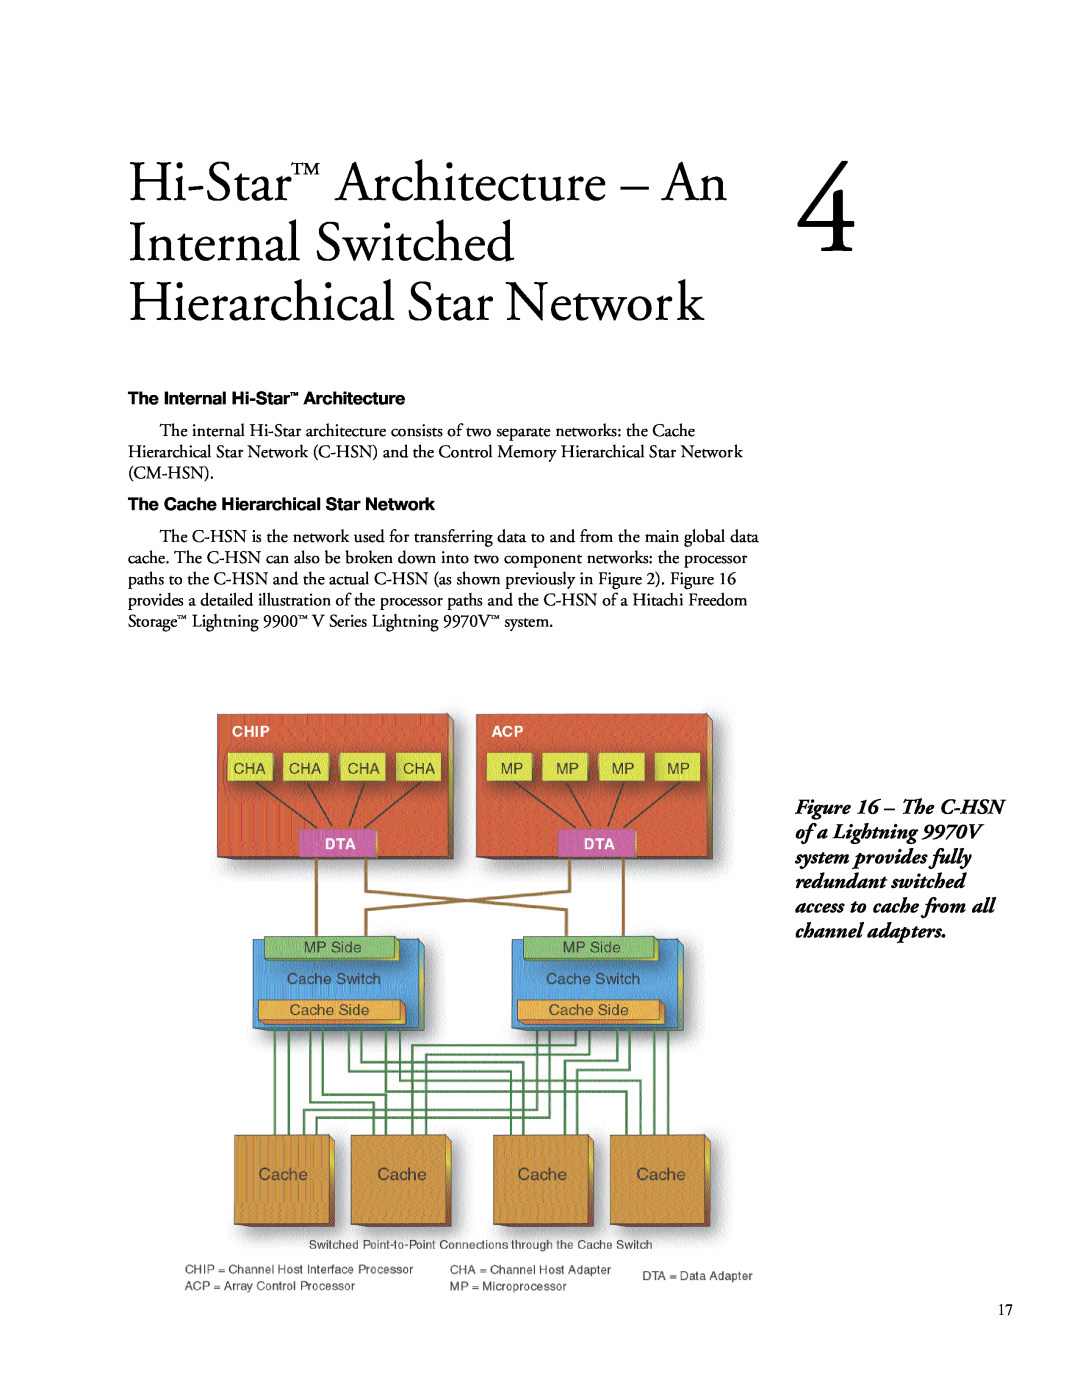 Hitachi 9900 Hi-Star Architecture – An, Internal Switched, Hierarchical Star Network, The Internal Hi-Star Architecture 